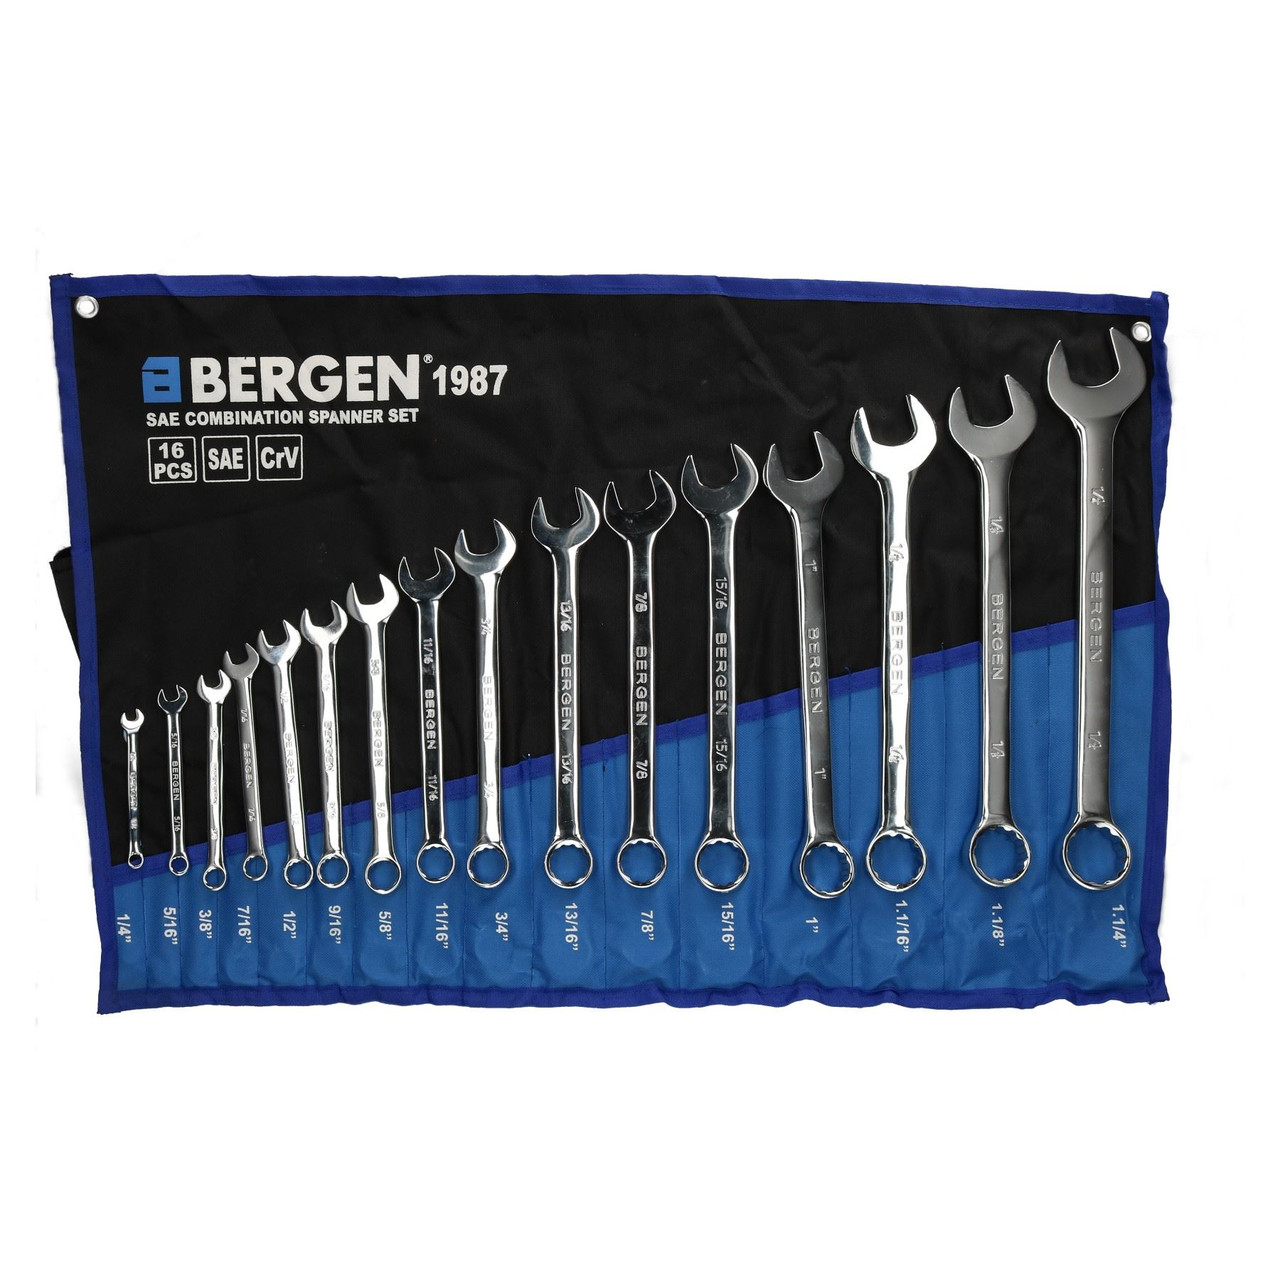 Imperial AF SAE Combinations Spanners Wrenches 1/4” 1-1/4” 16pc Set Bergen 